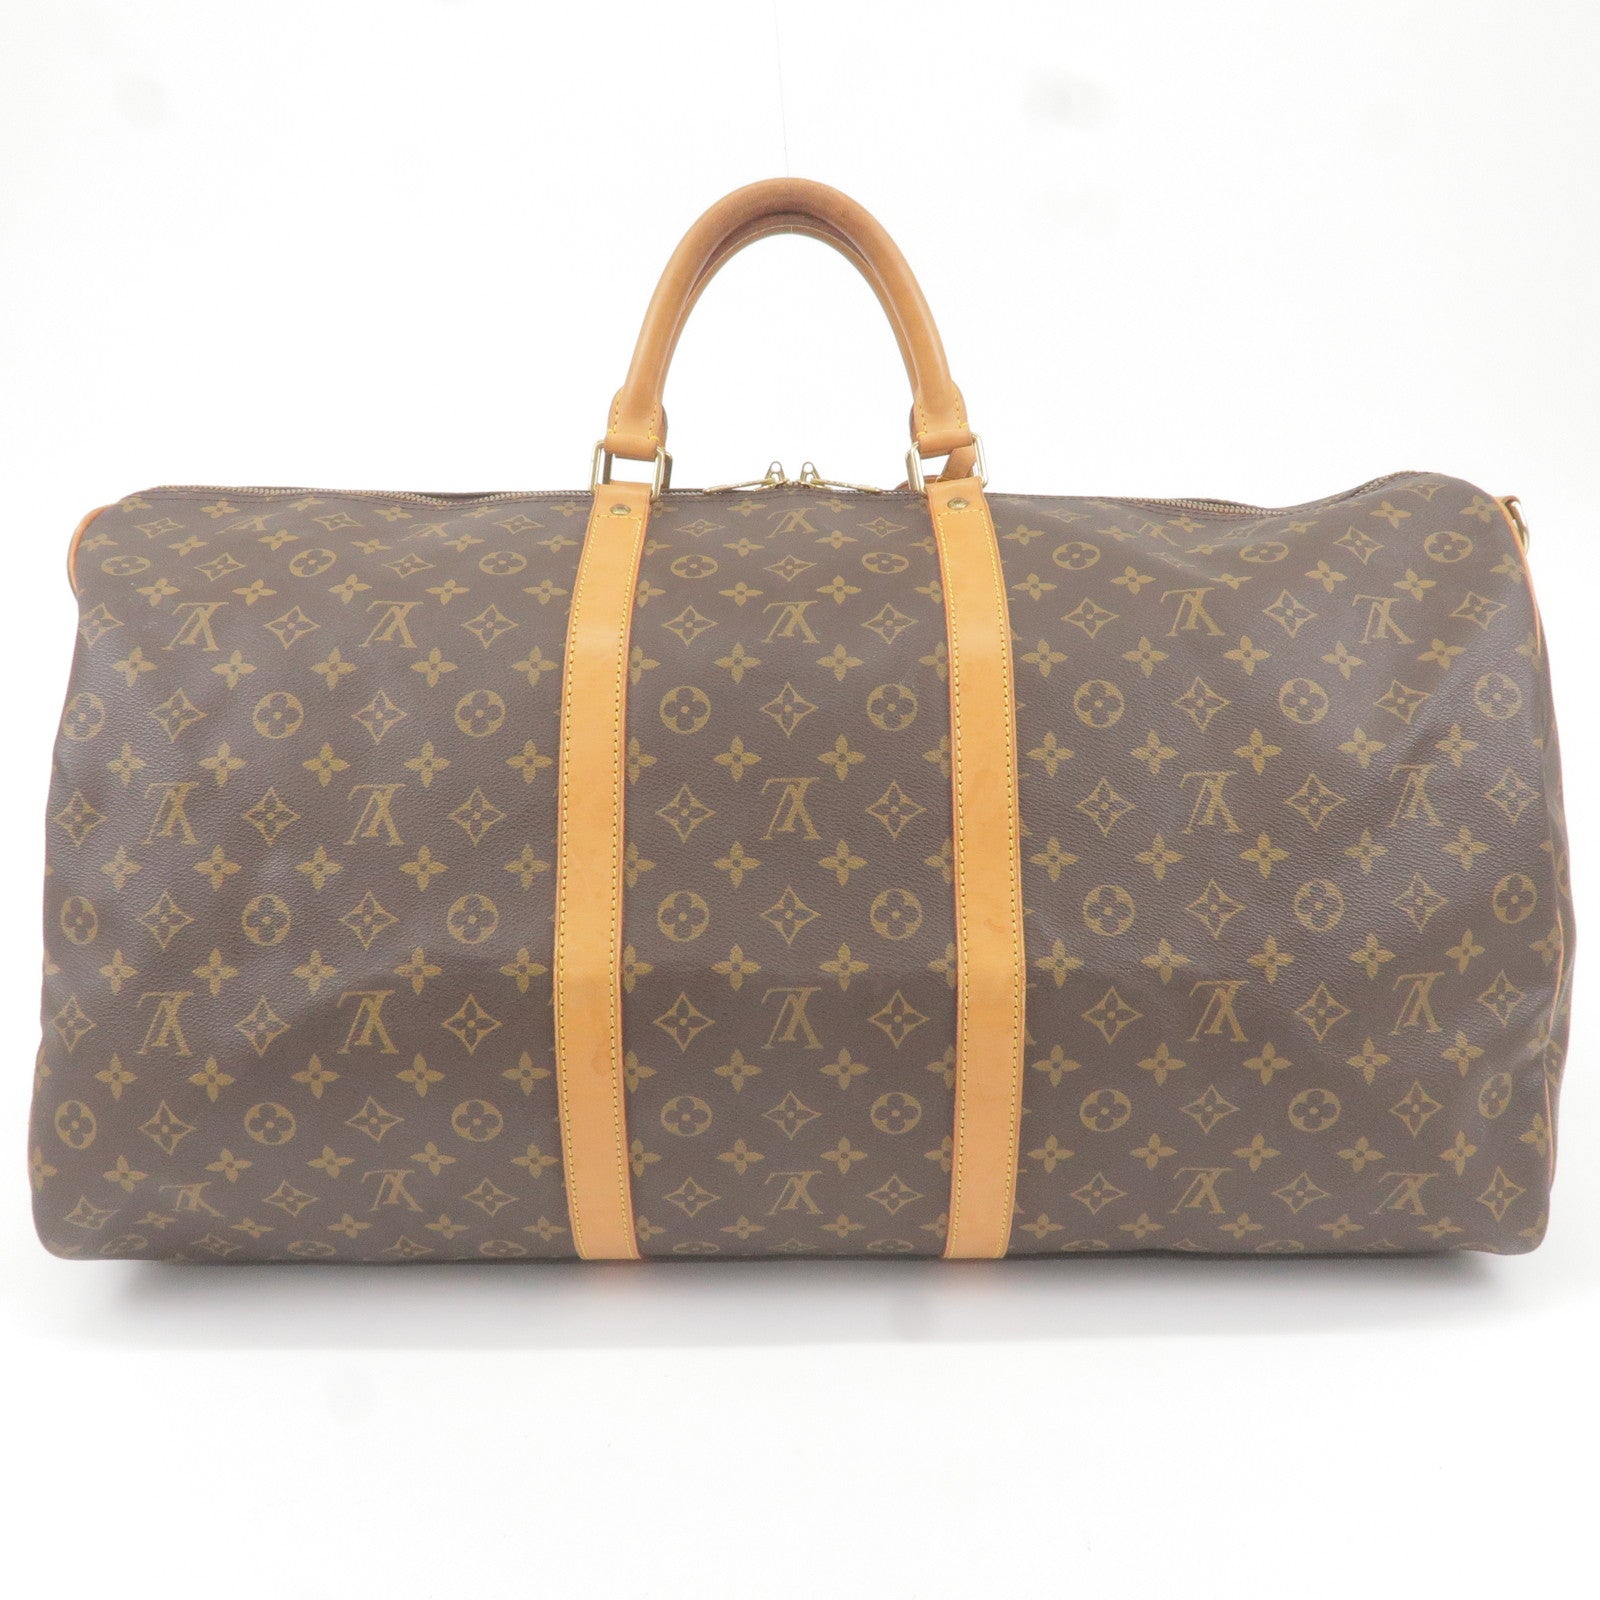 Bag - THESE NINE COLOURWAYS COME FROM THE LOUIS VUITTON AIR FORCE 1 -  ep_vintage luxury Store - Vuitton - 60 - All - Louis - Bandouliere -  Monogram - M41412 – dct - Keep